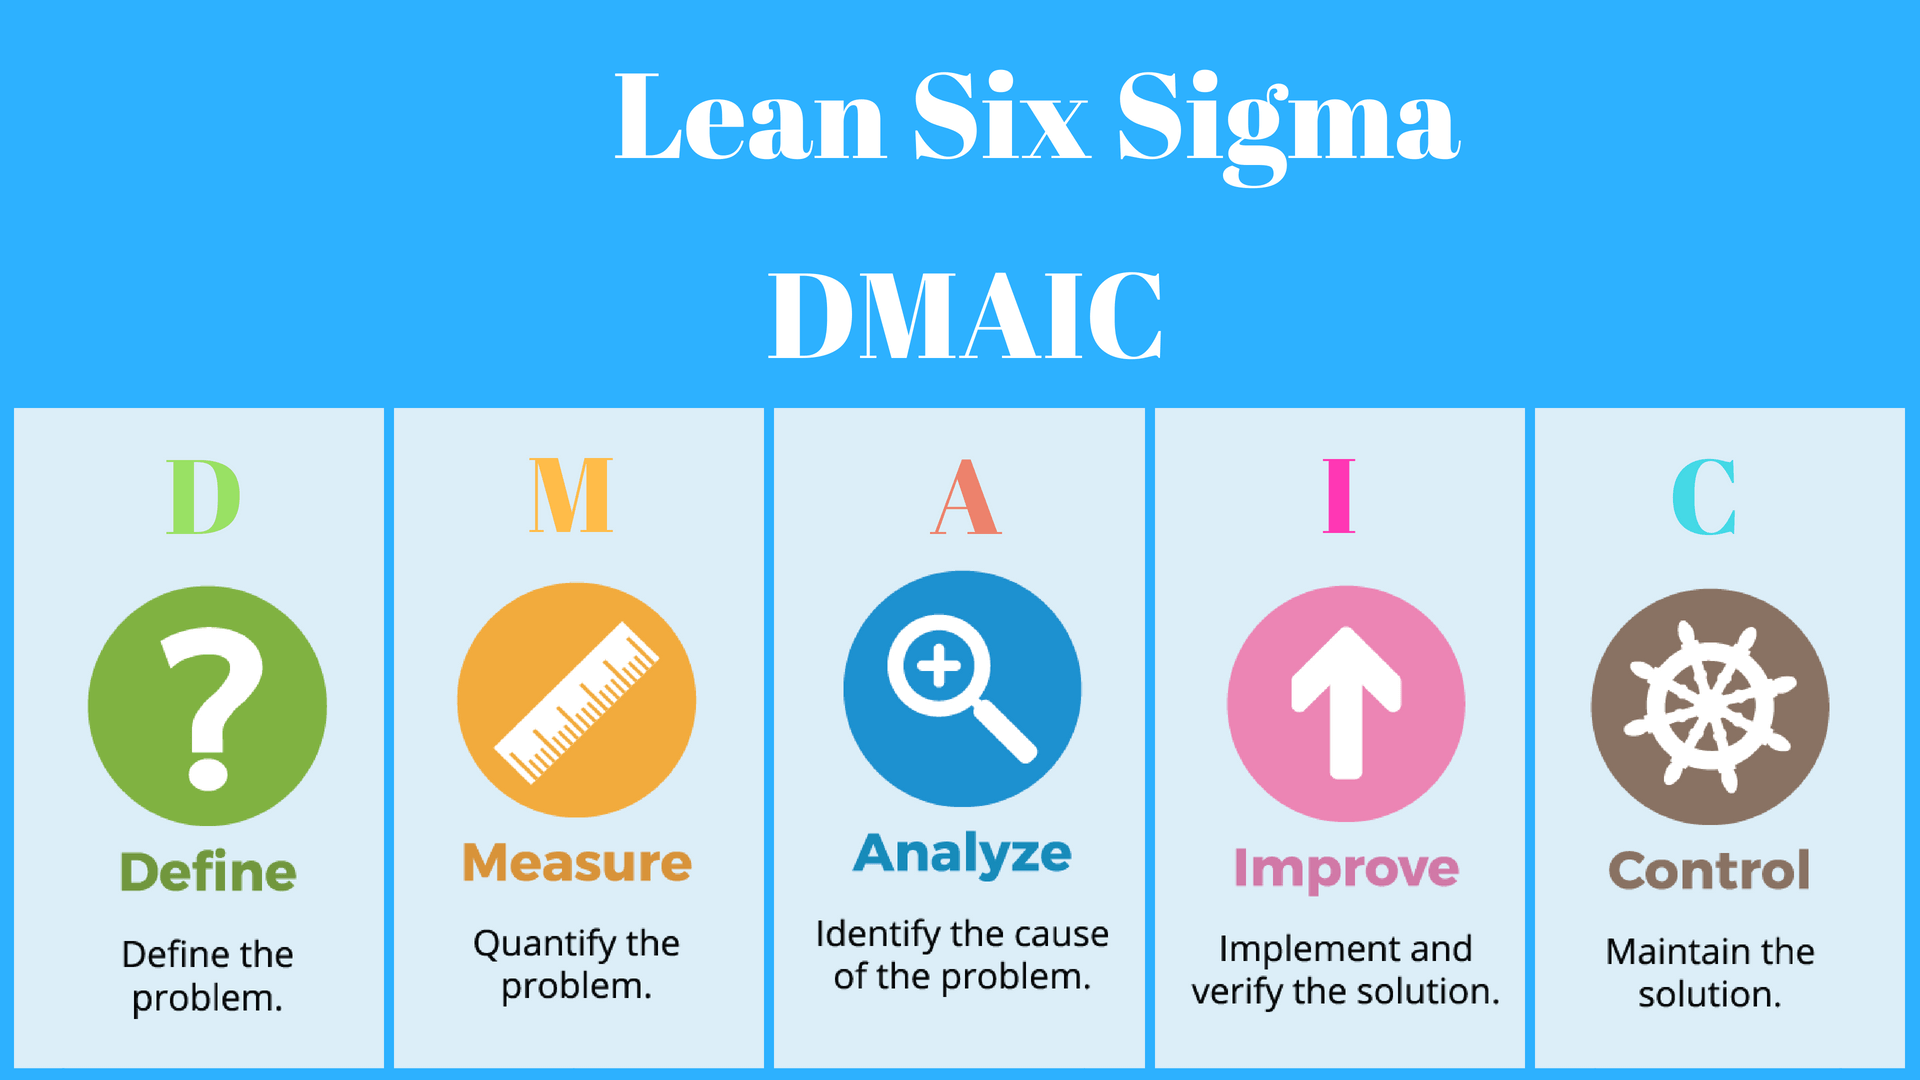 How is Lean Six Sigma DMAIC Process Defined?